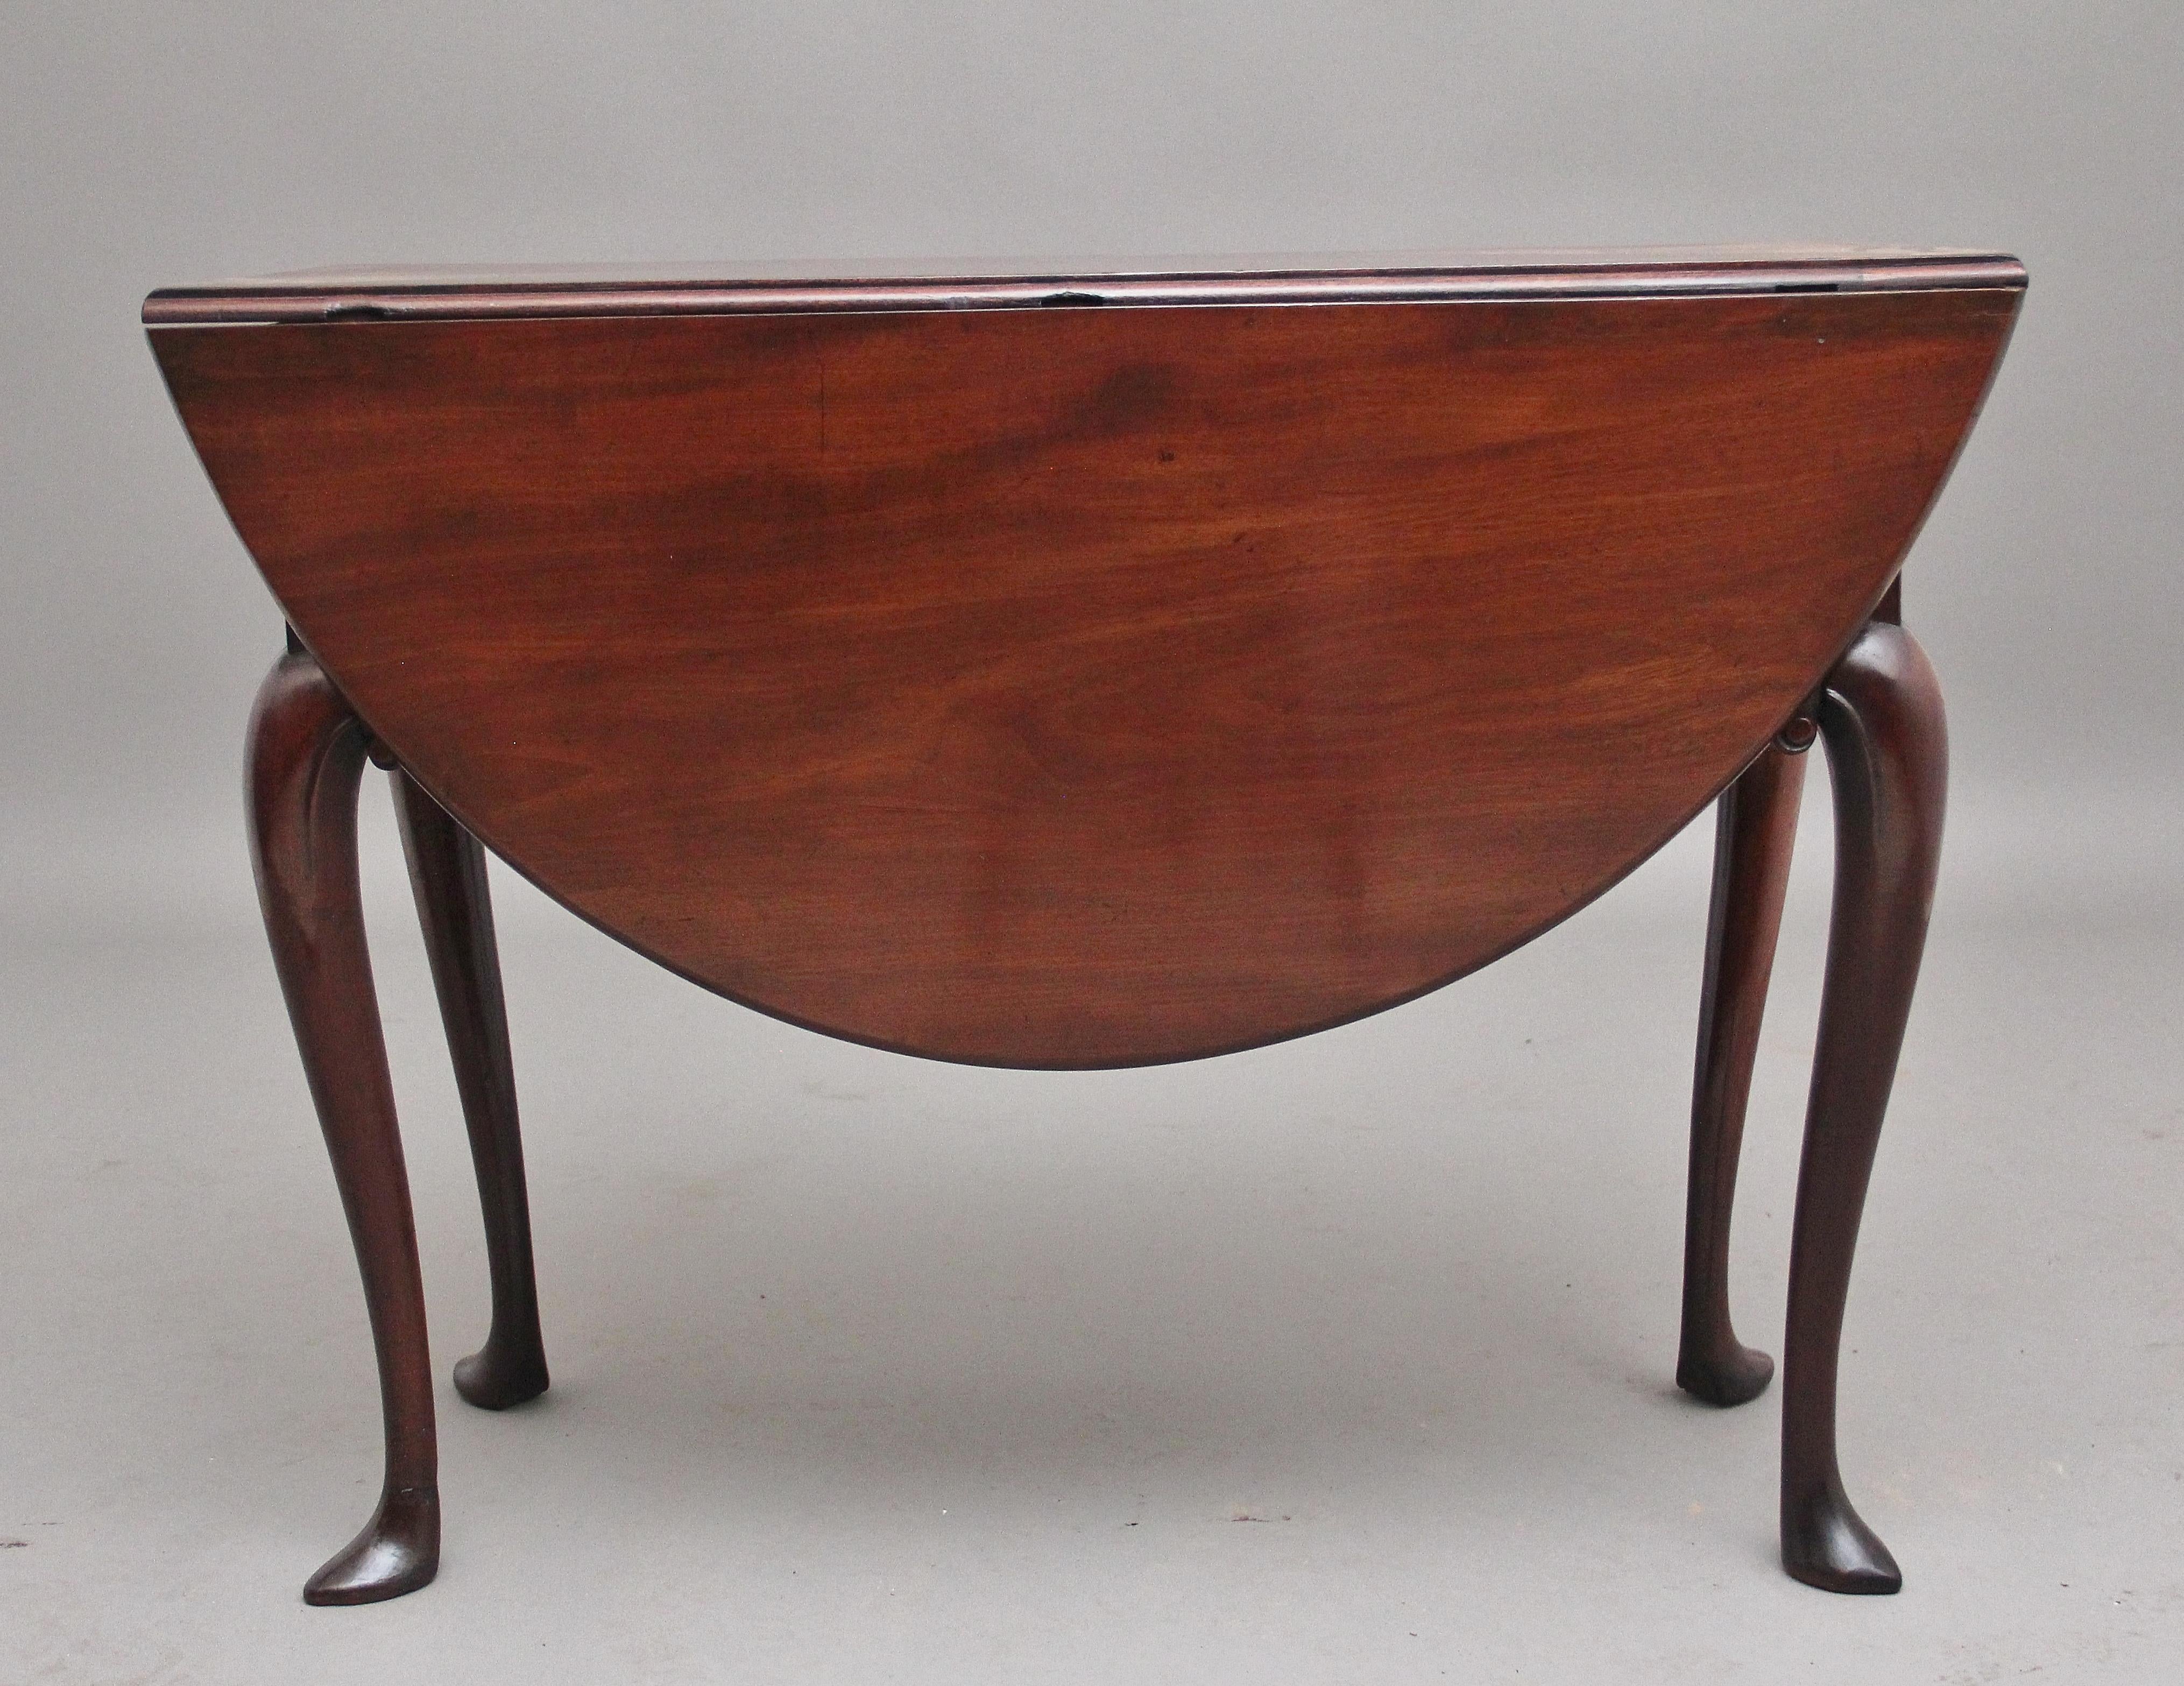 18th century Georgian mahogany drop leaf table, having a lovely figured solid top, once the leaves are fully extended the top is oval in shape, standing on elegant cabriole legs with carved scroll decoration, having a lovely warm rich mahogany